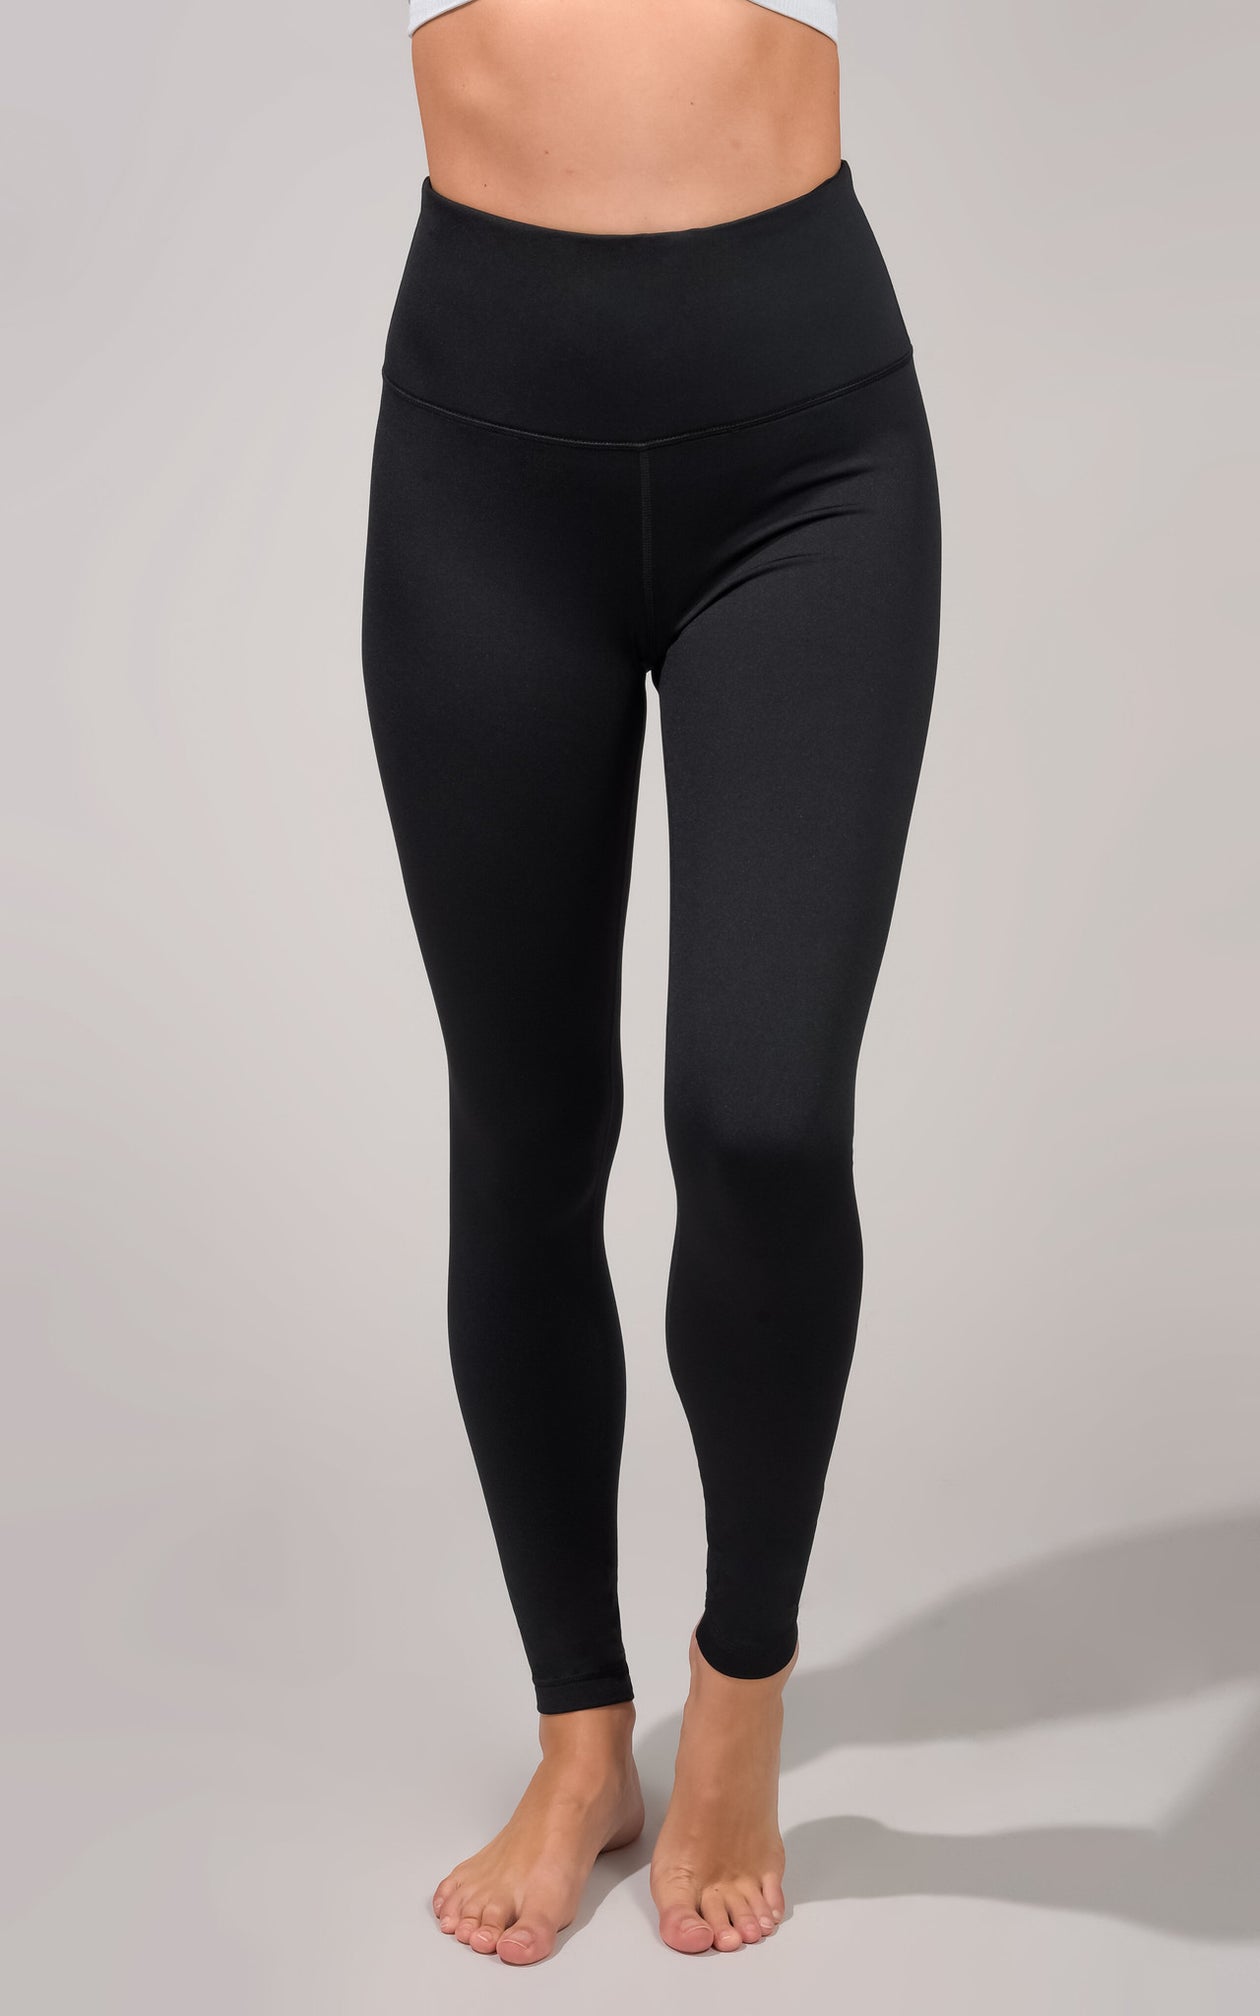  Winter Fleece Lined Tights For Women, High Waisted